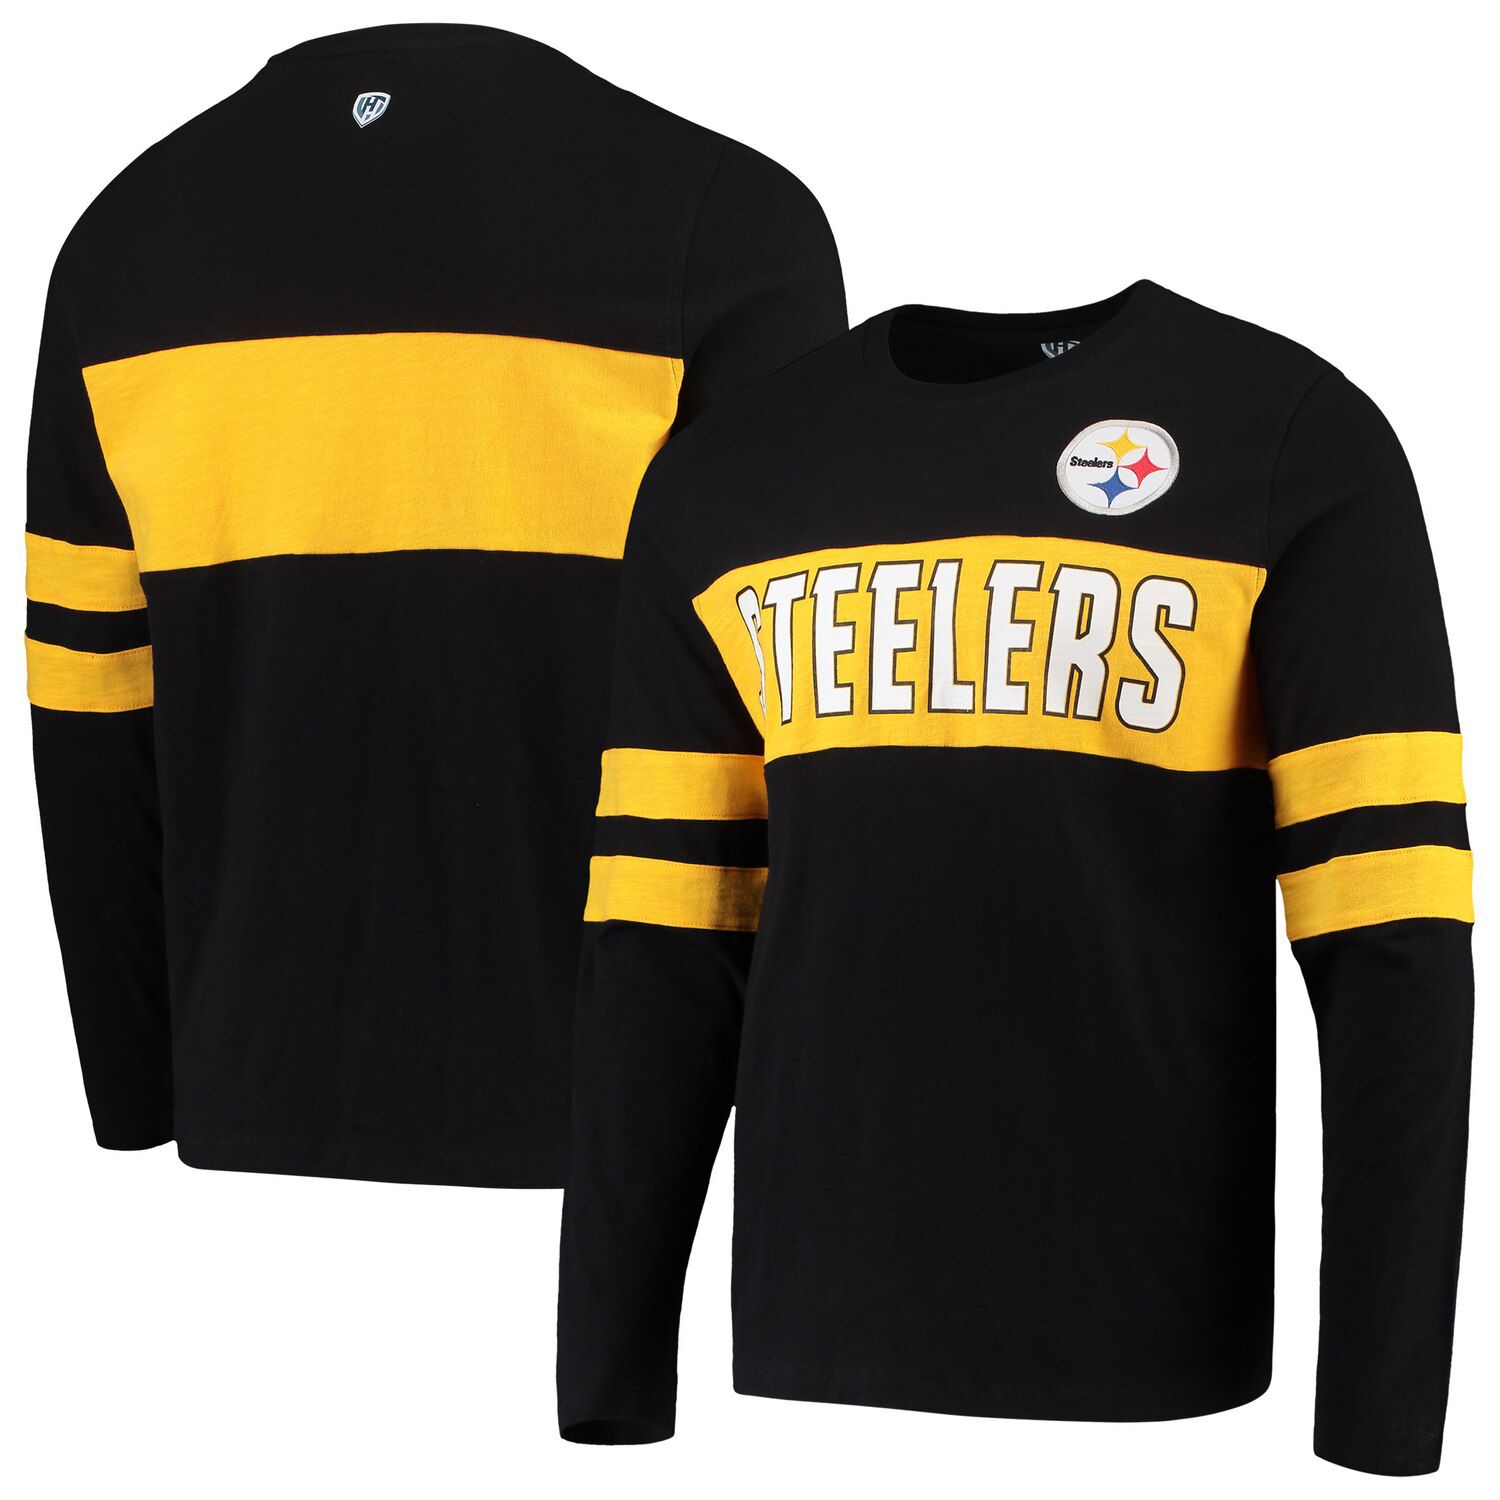 steelers game jersey sale